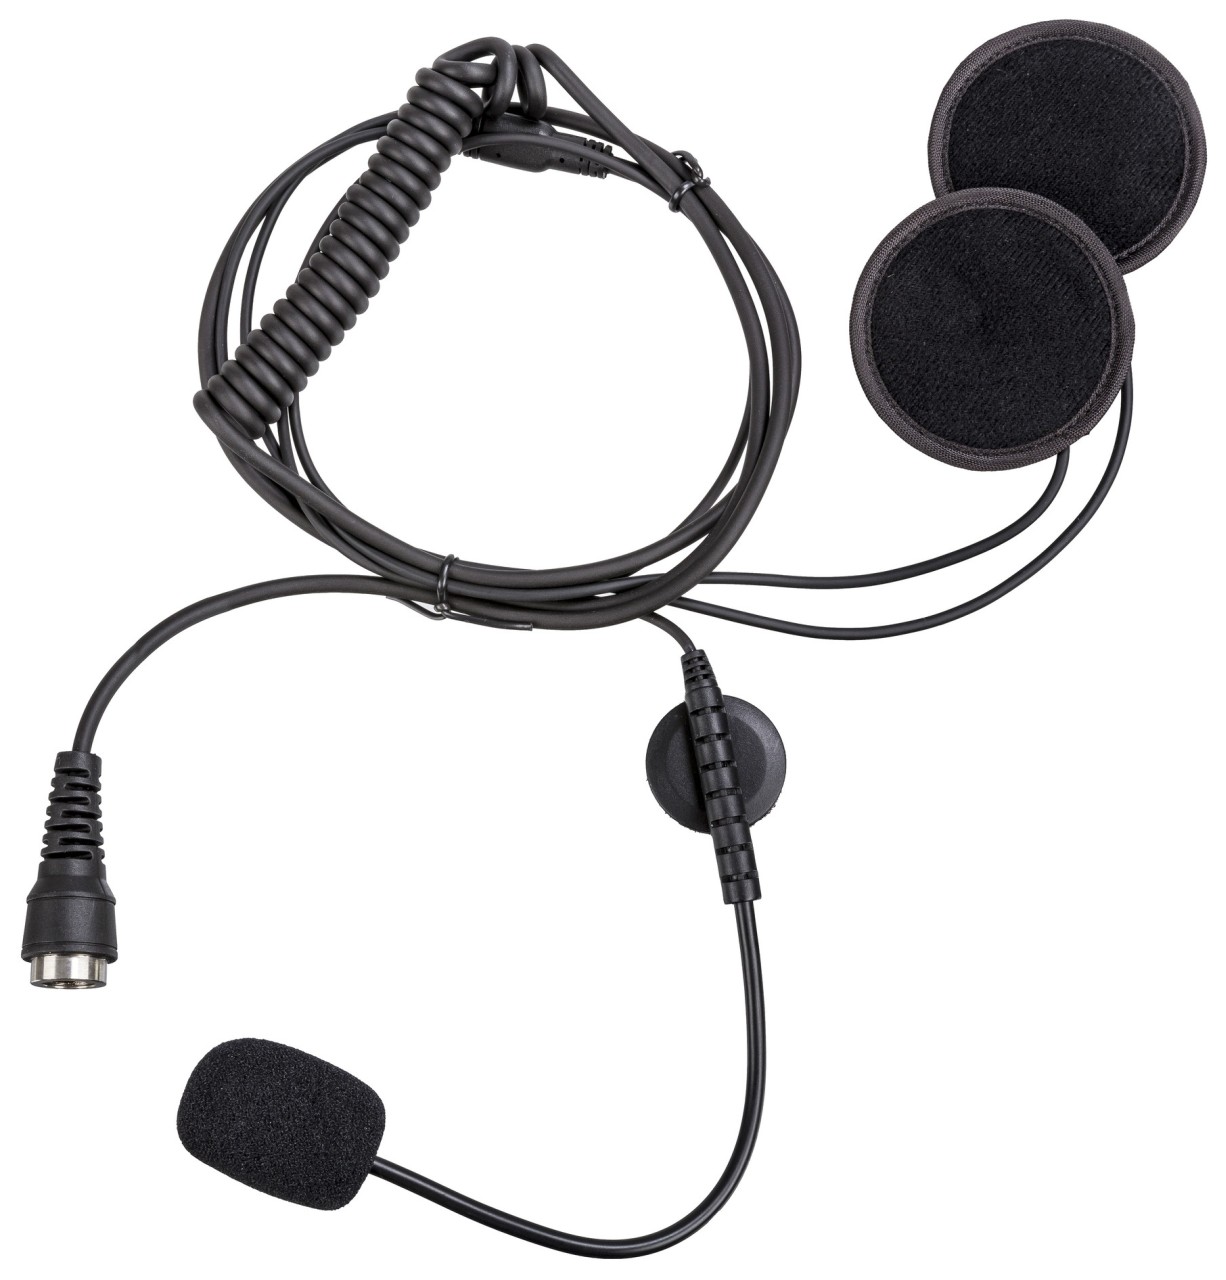 Motorcycle Helmet Headset with magnetic connector